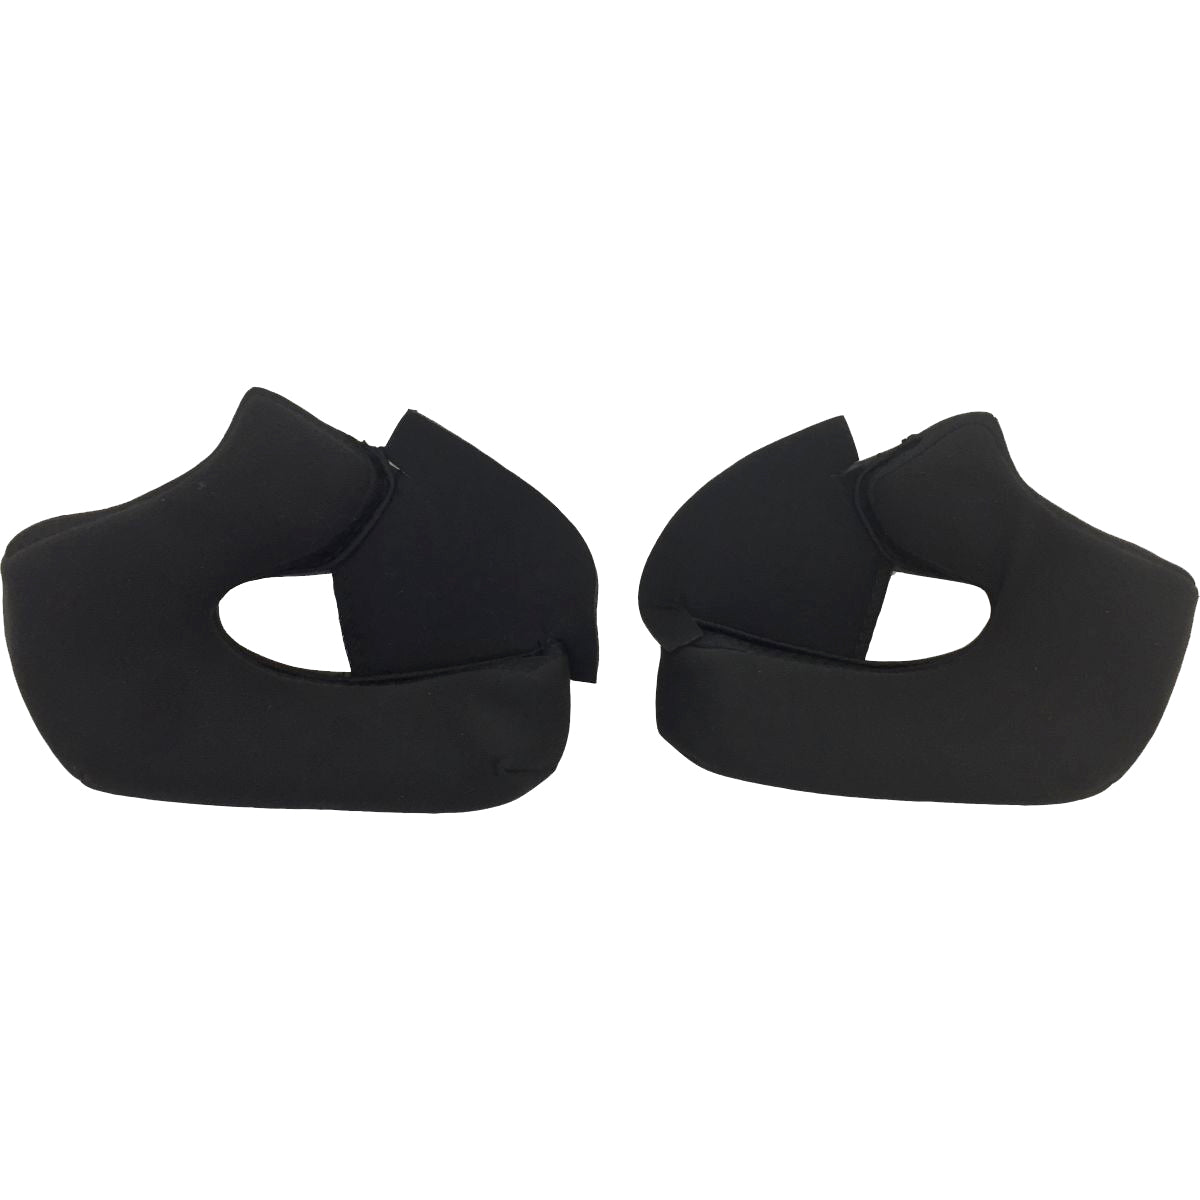 Viewing Images For LS2 Cheek Pads for Strobe Helmets :: MotorcycleGear.com